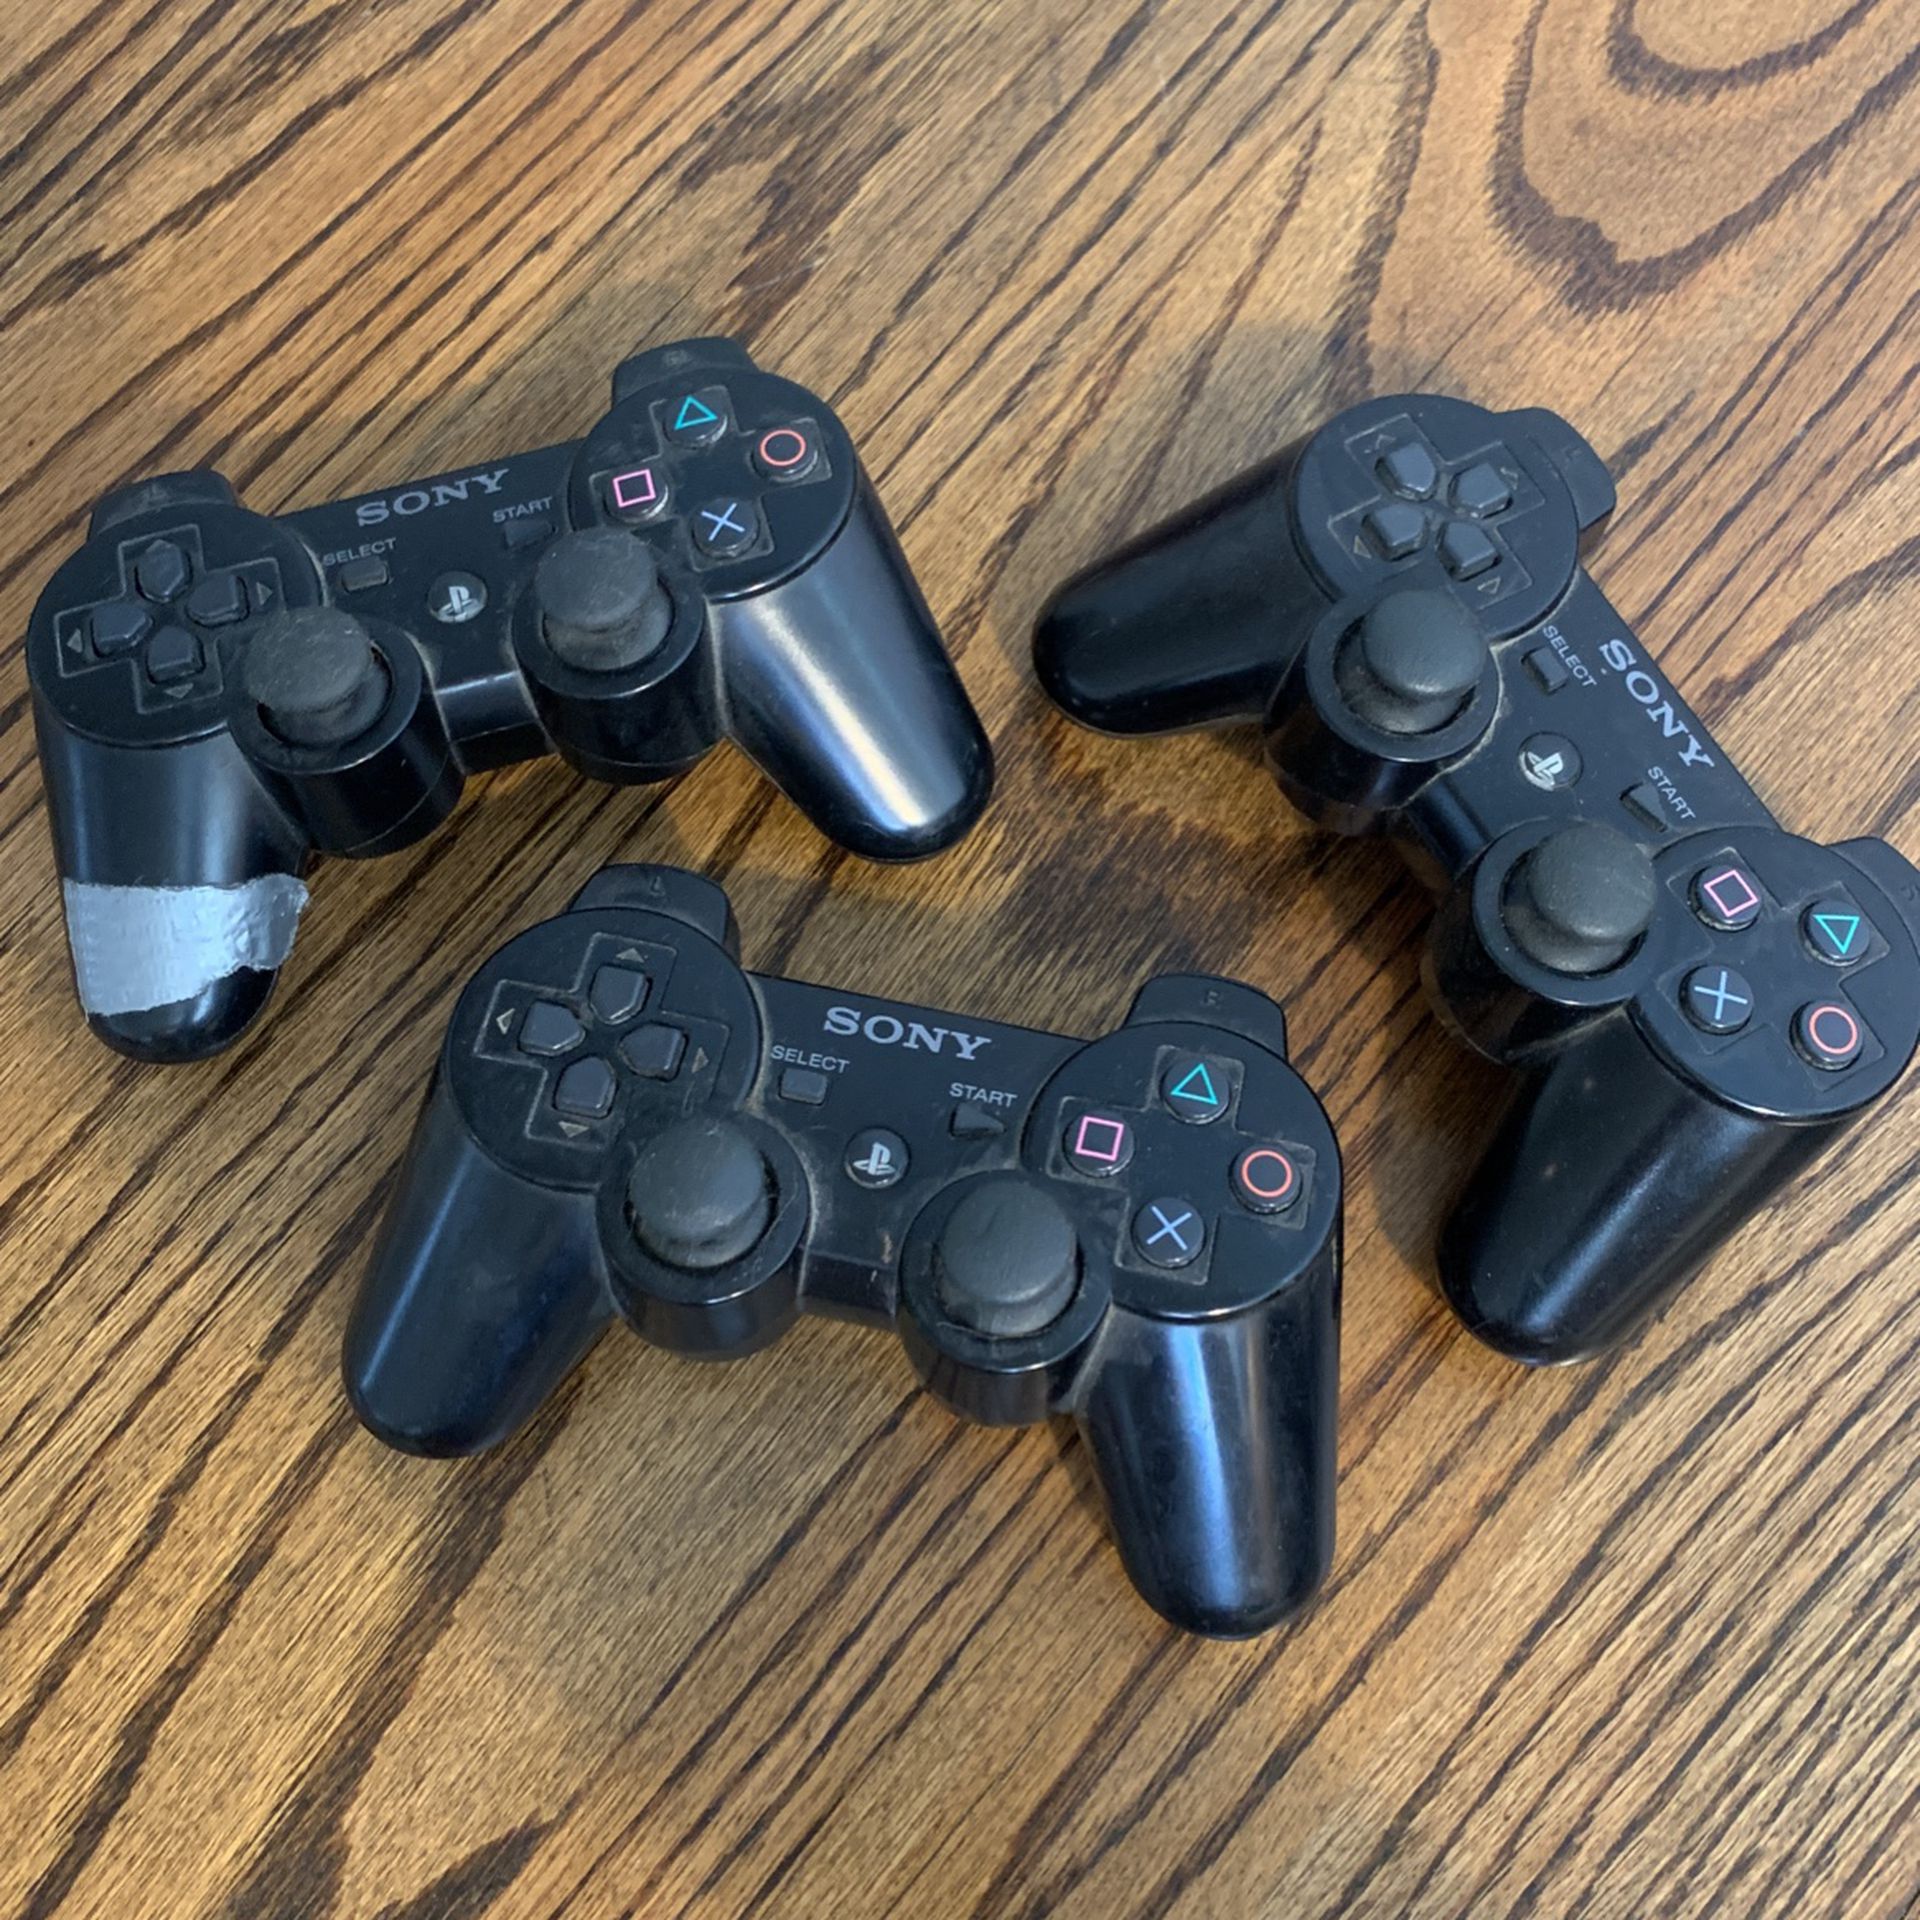 3 non-functional PS3 Controllers